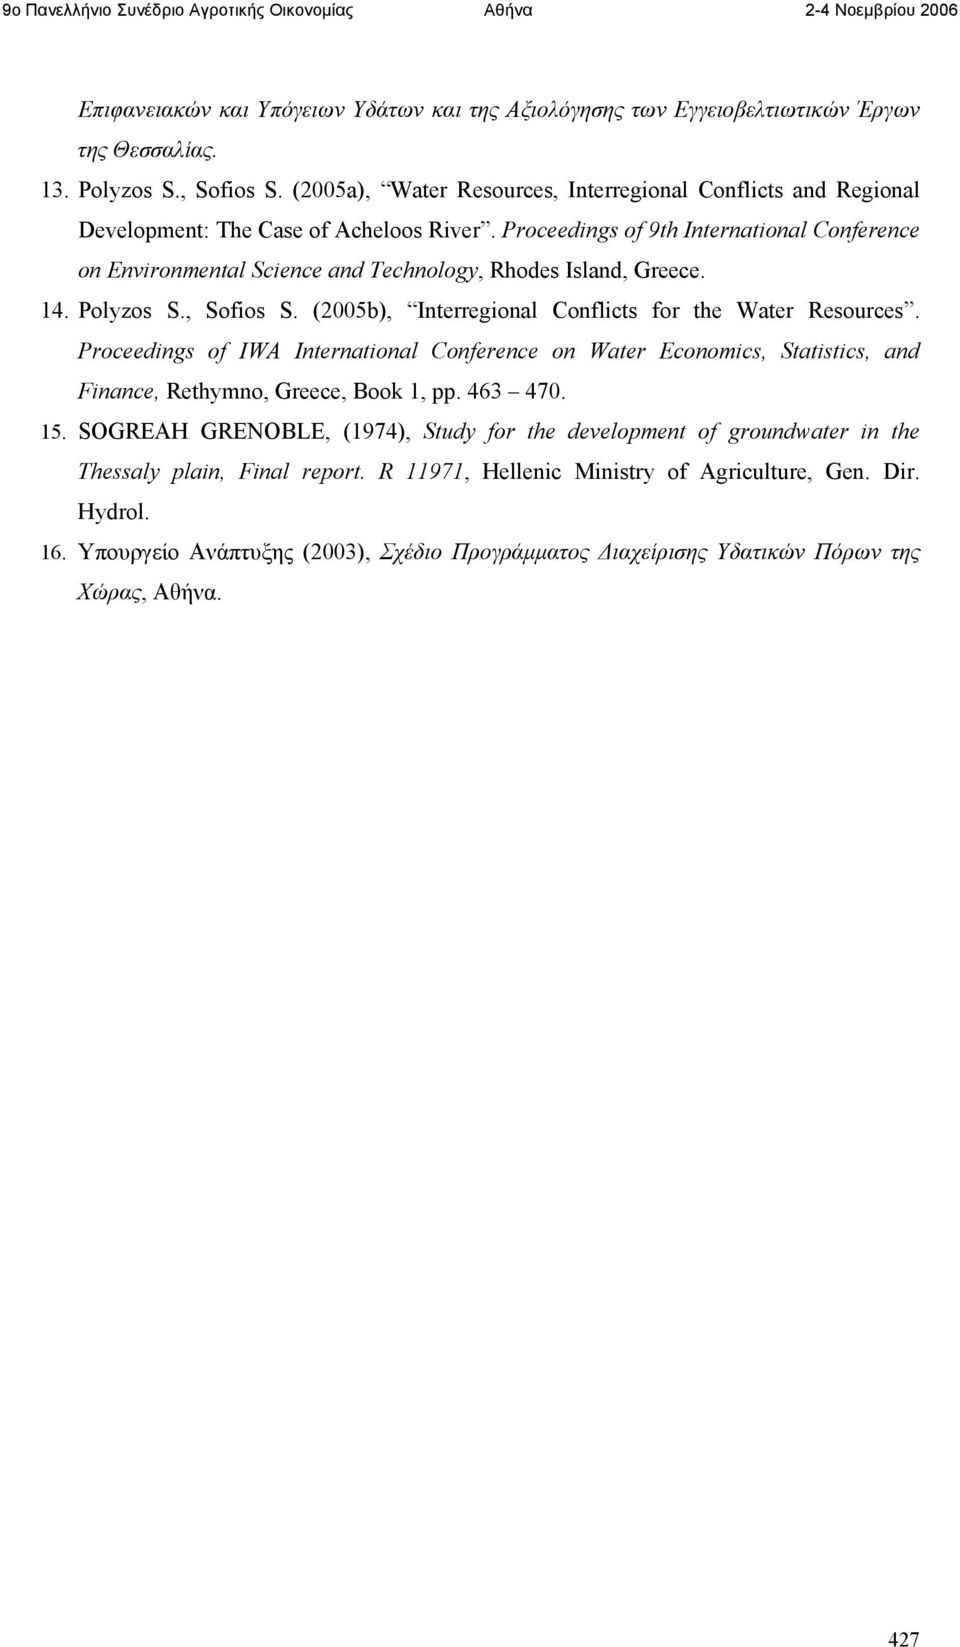 Proceedings of 9th International Conference on Environmental Science and Technology, Rhodes Island, Greece. 14. Polyzos S., Sofios S. (2005b), Interregional Conflicts for the Water Resources.